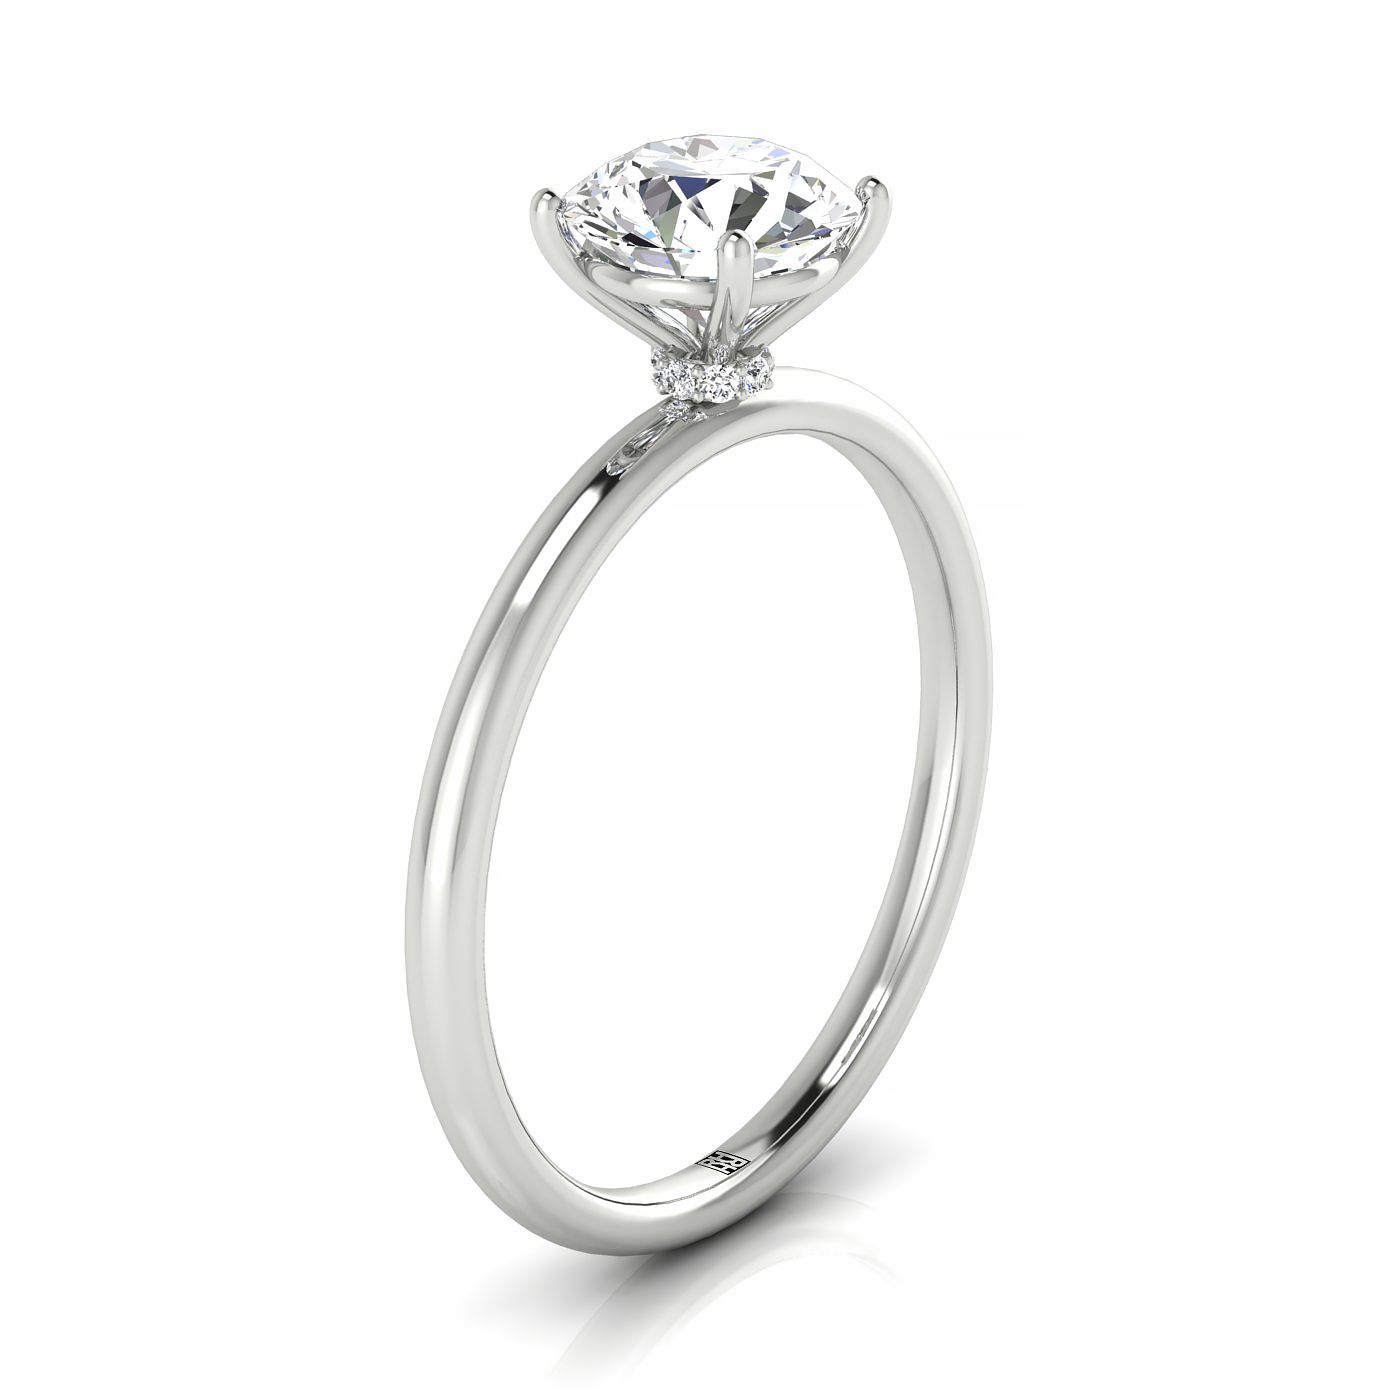 14kw Round Solitaire Engagement Ring With Hidden Halo With 8 Prong Set Round Diamonds